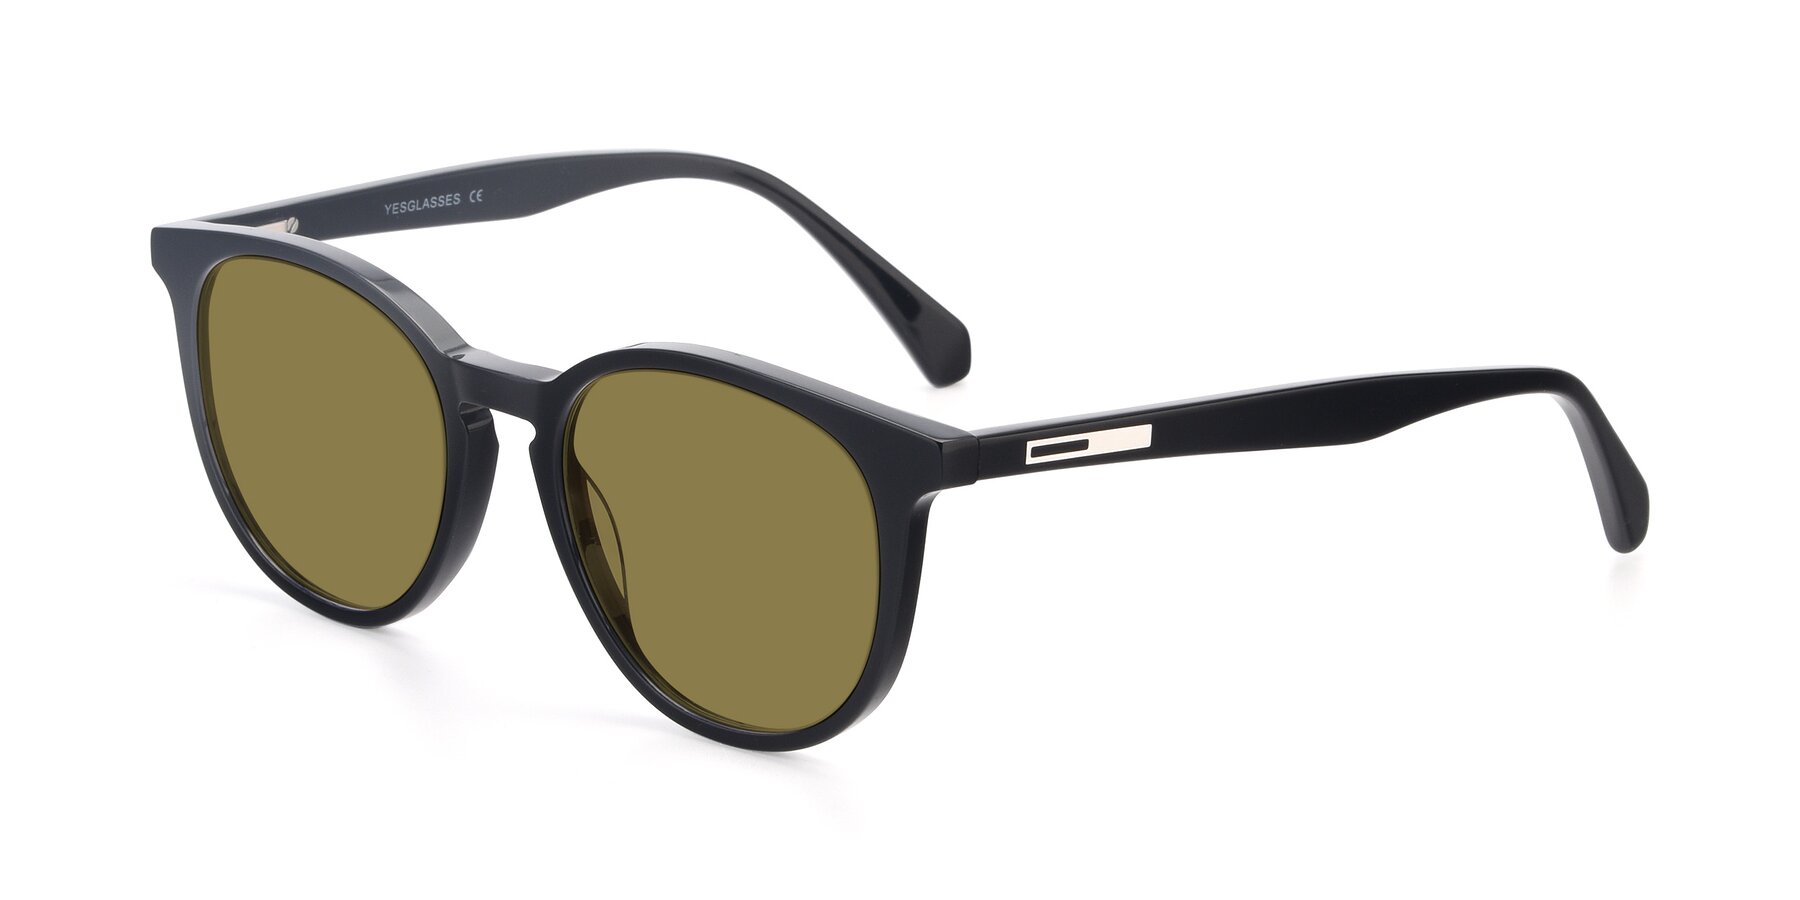 Angle of 17721 in Black with Brown Polarized Lenses